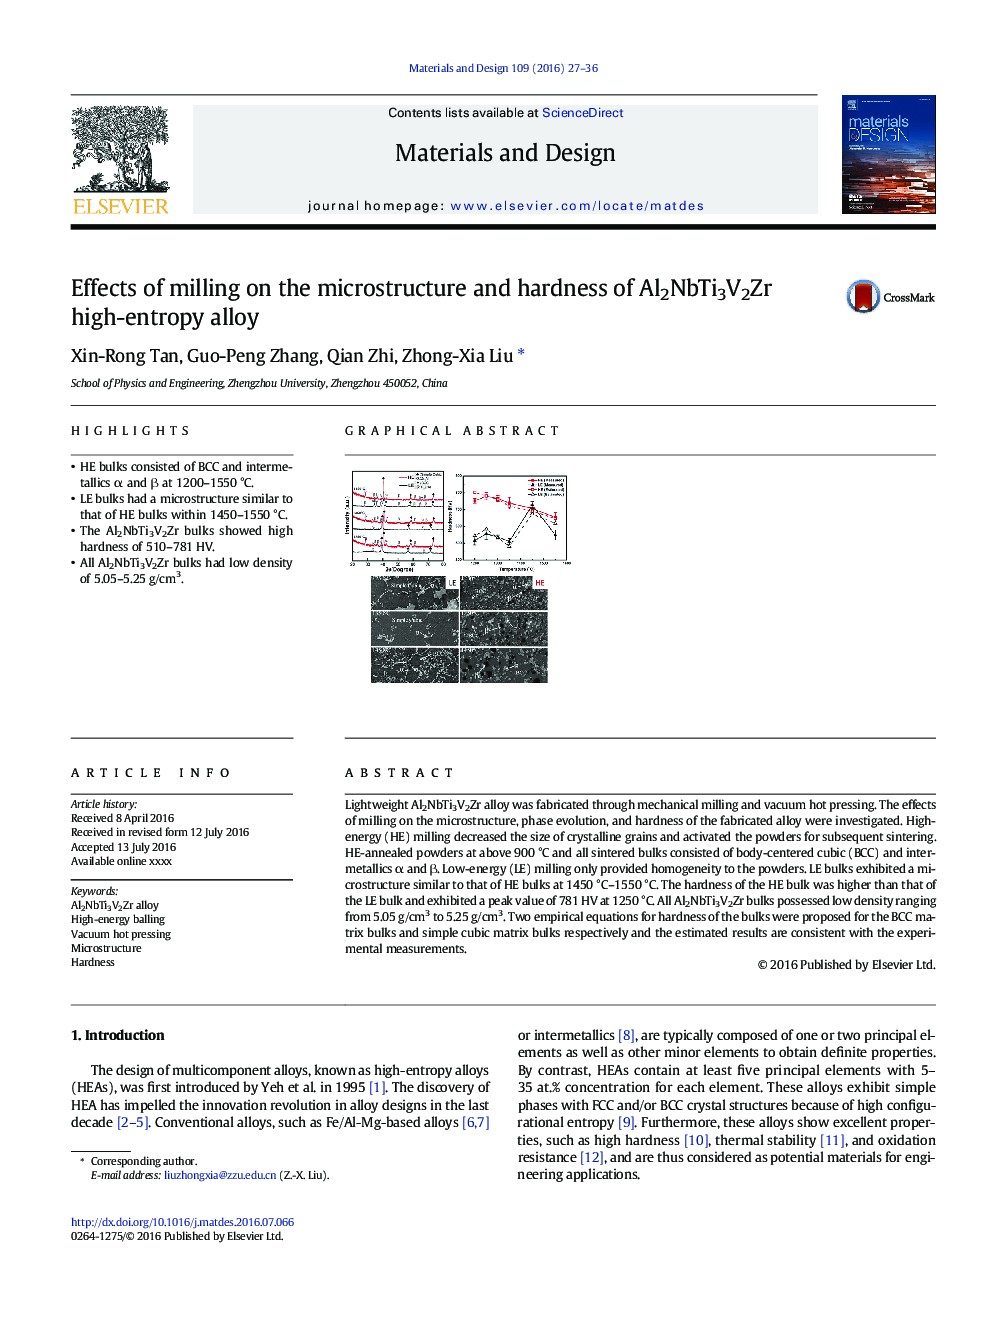 Effects of milling on the microstructure and hardness of Al2NbTi3V2Zr high-entropy alloy